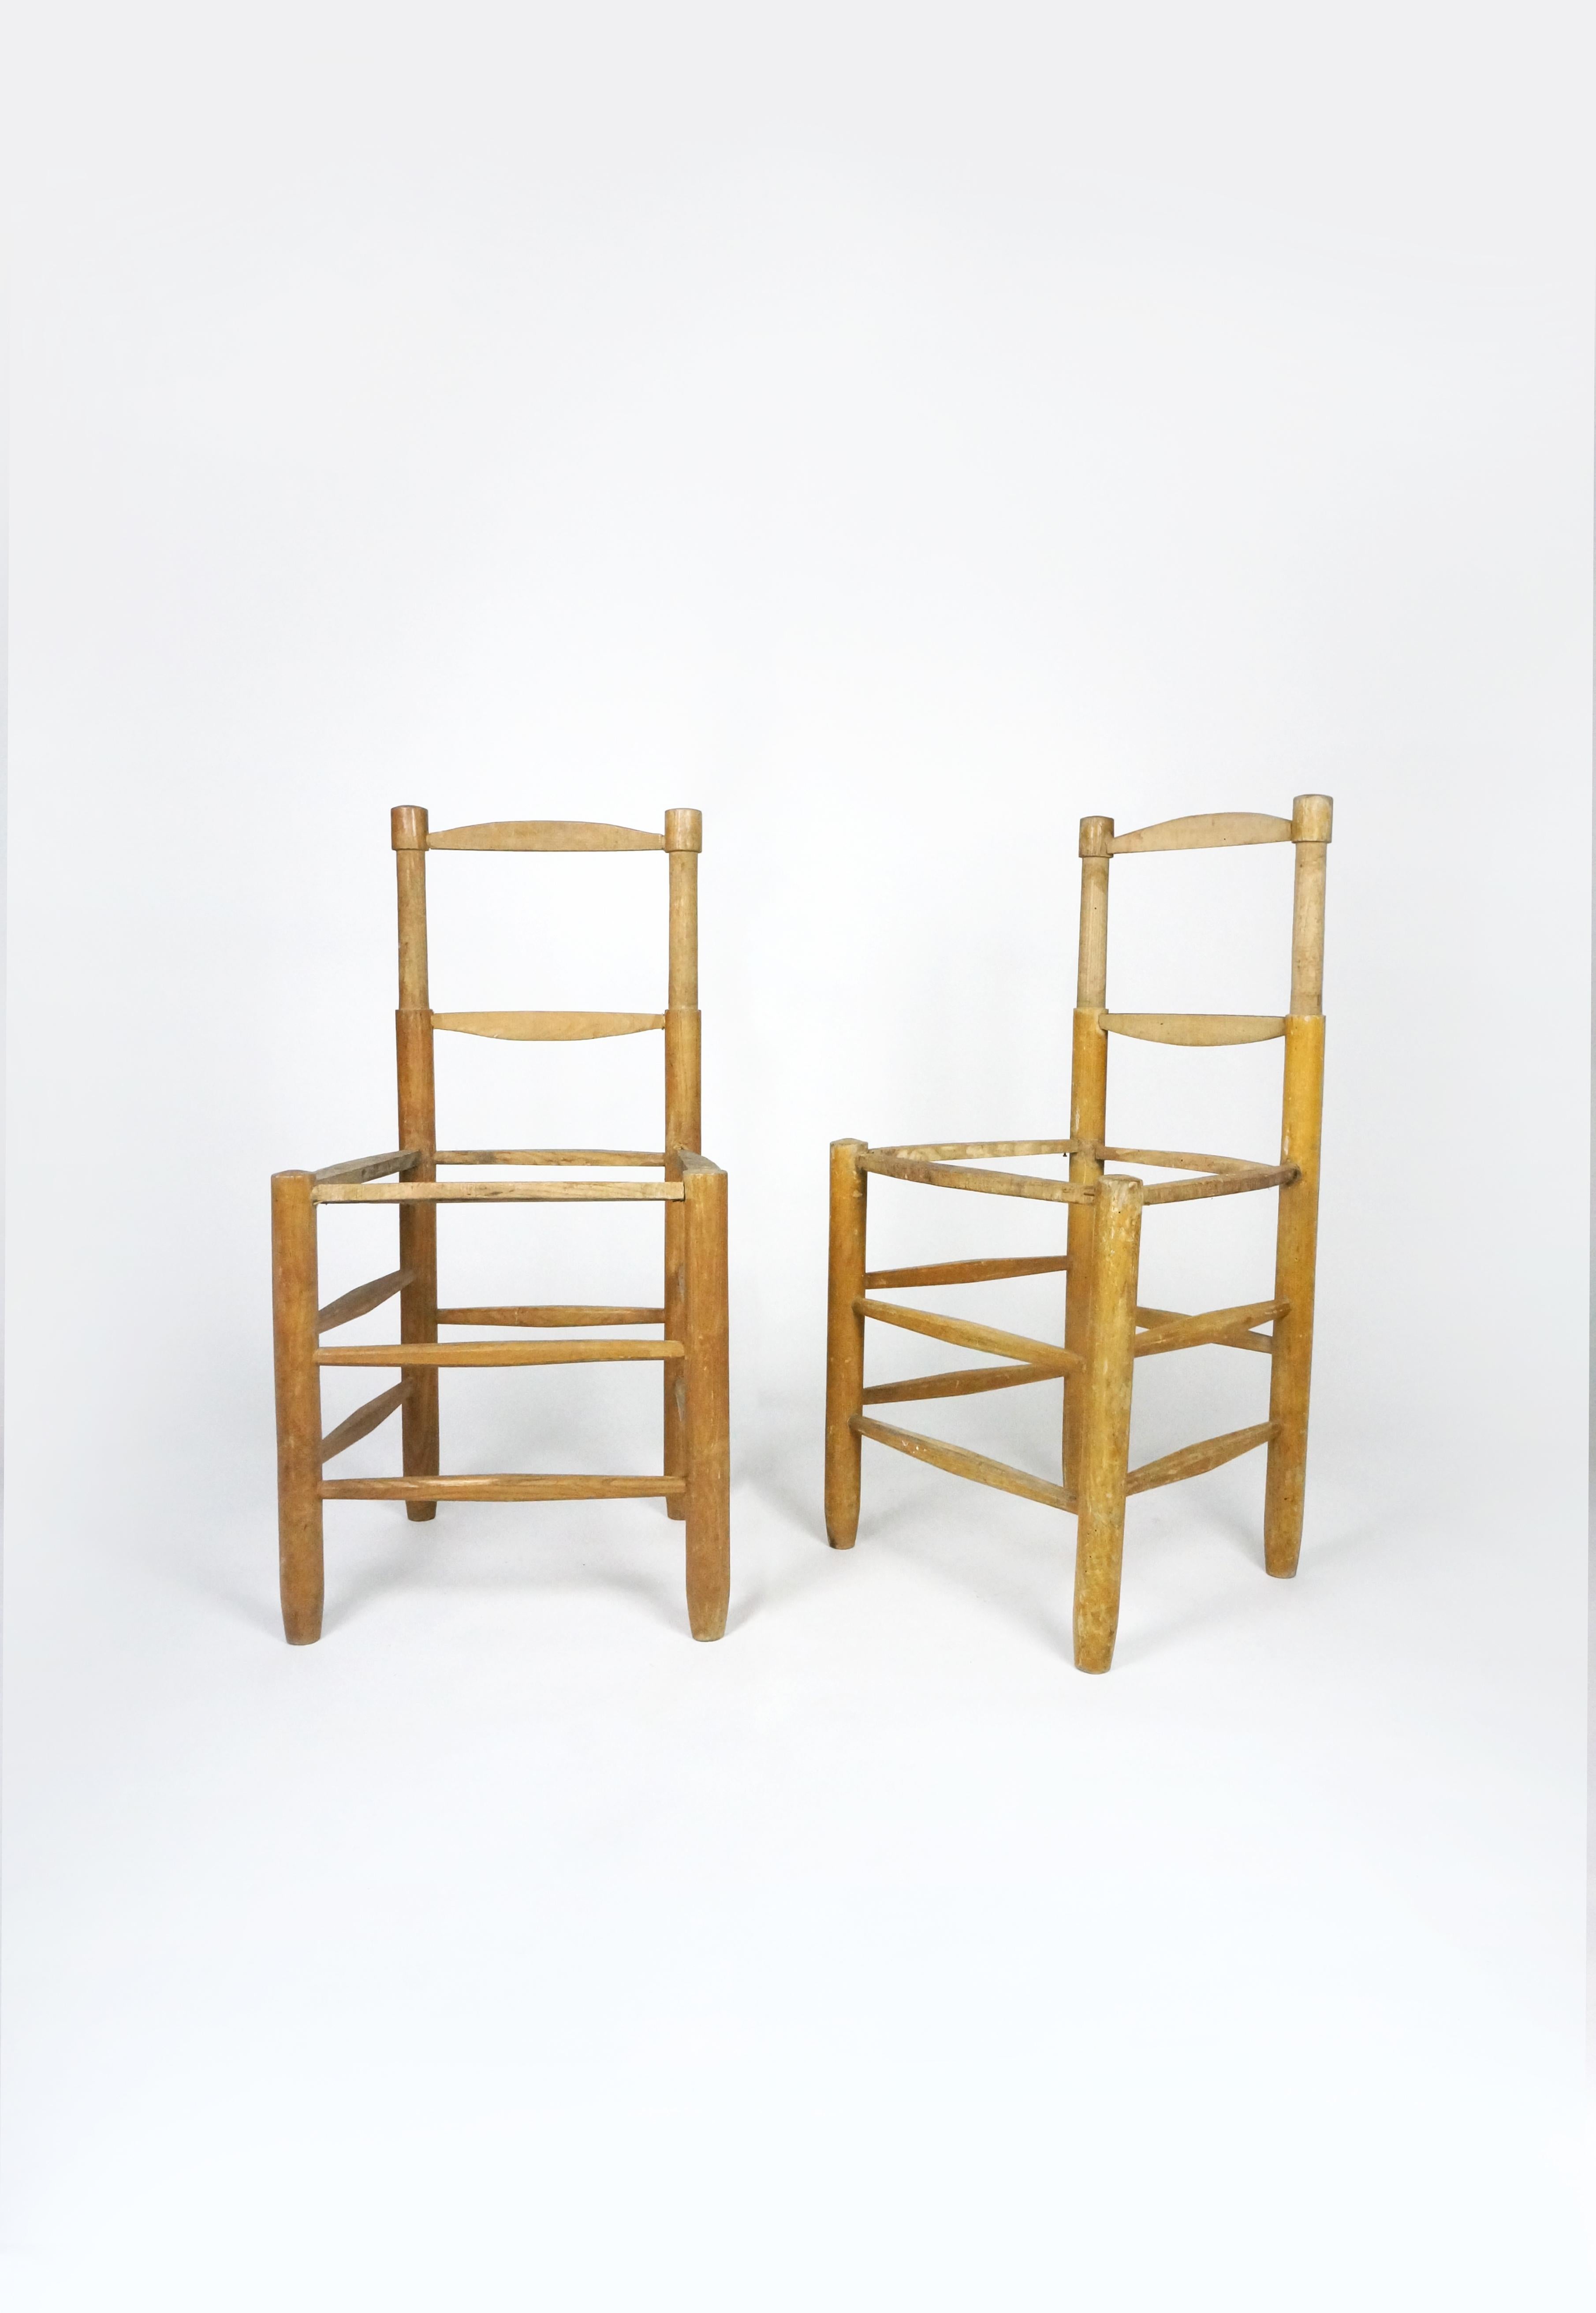 Nice pair of Charlotte Perriand chairs model Bauche n°18 (with straight backrest). 

These chairs were created by the famous french designer Charlotte Perriand. They were originally designed in 1938, these two were made in the 1950s, edited by